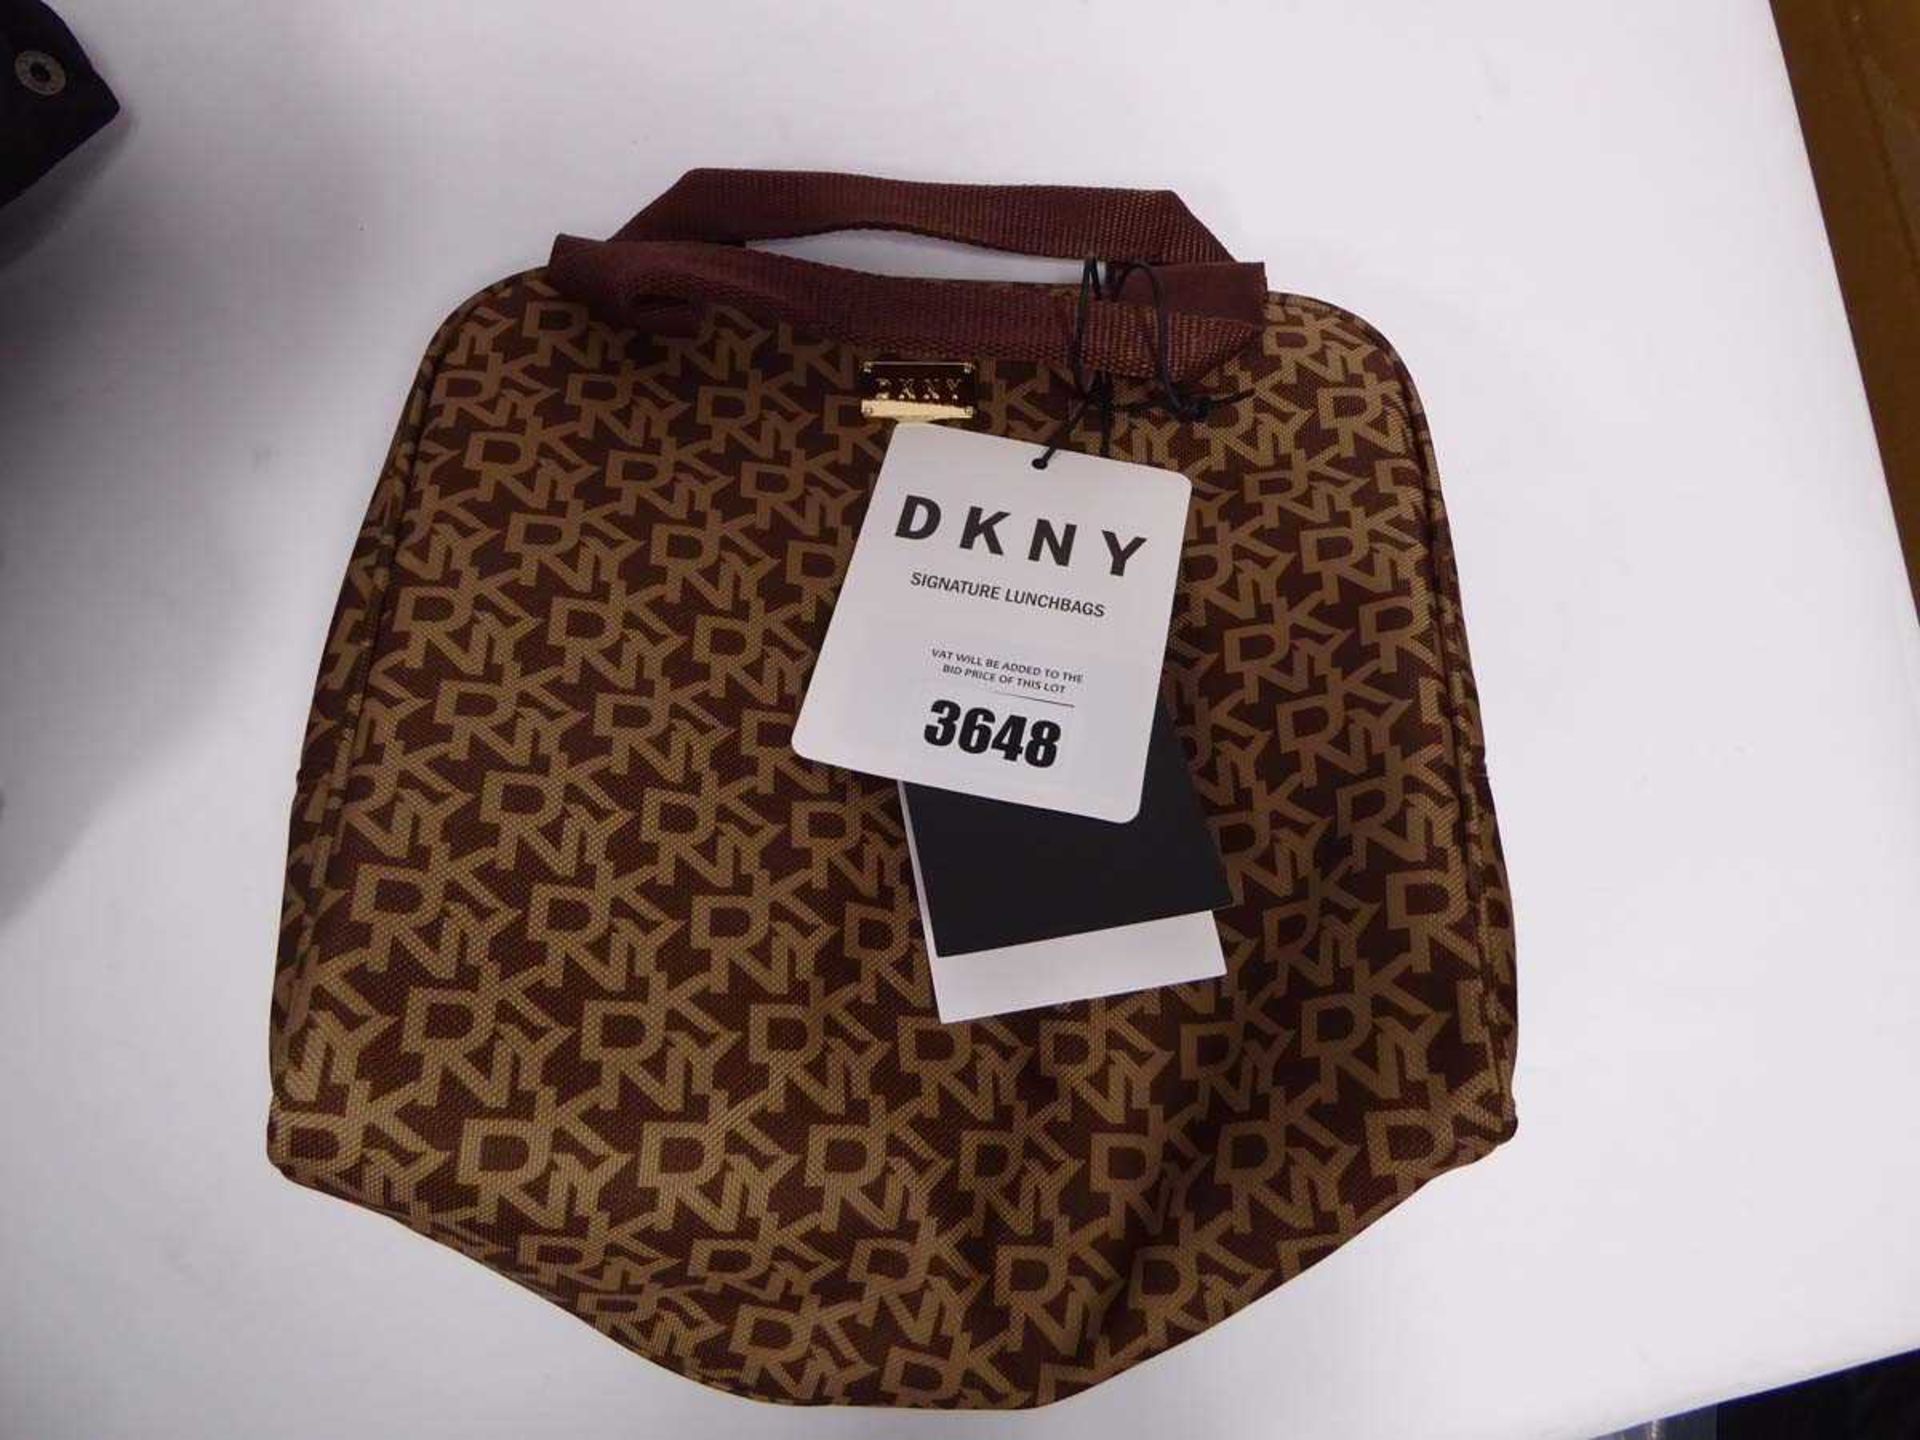 +VAT DKNY signature lunchbag in coffeebean